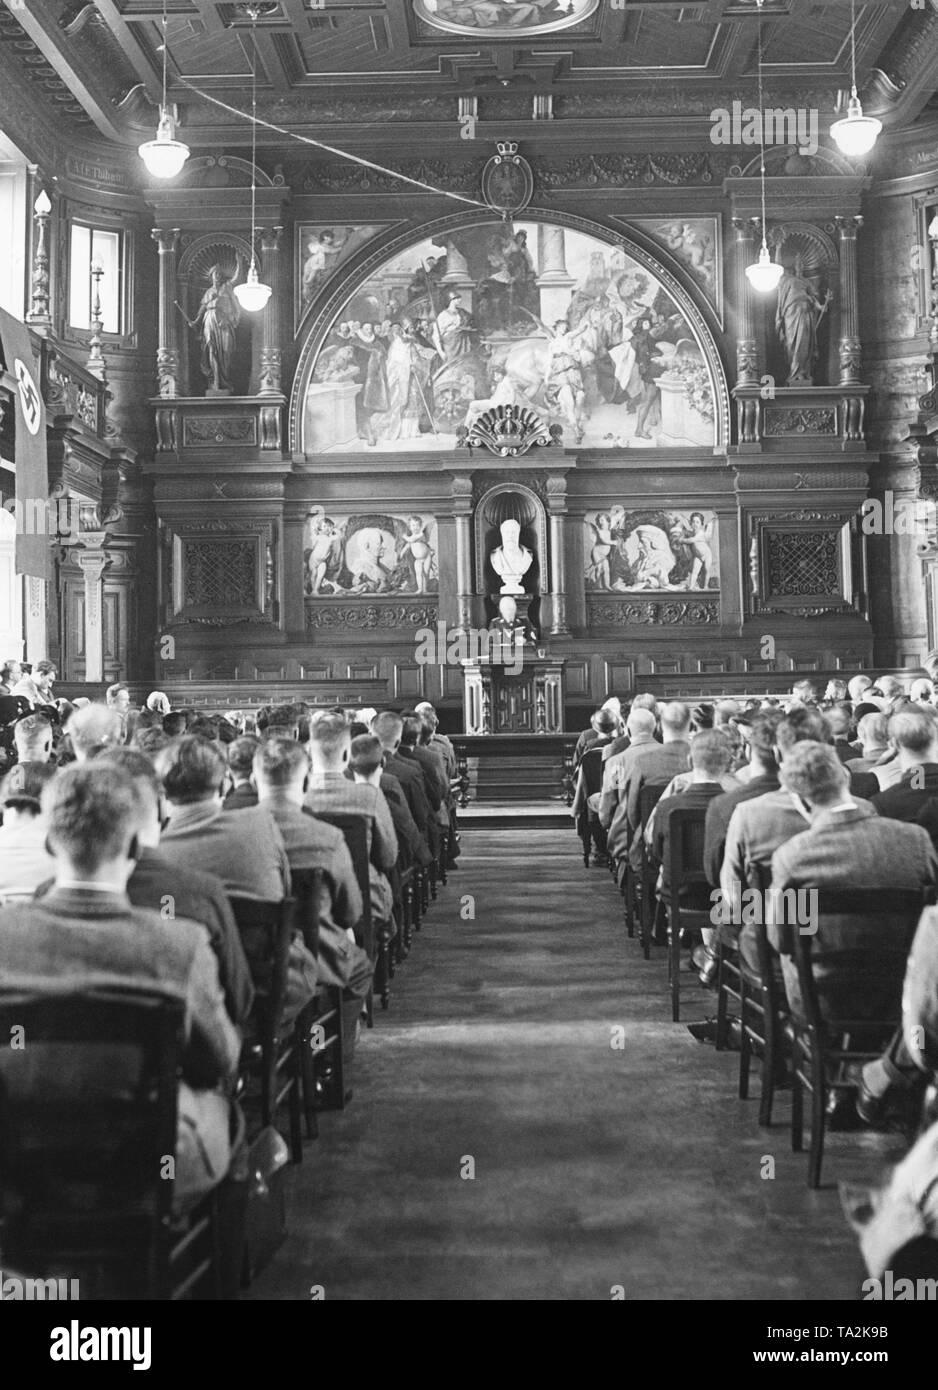 Dr. Paul Schmitthenner, Minister of State and Head of the Ministry of Culture, dressed in SS uniform, gives a lecture in the auditorium filled with listeners in the building of the Old Heidelberg University. A swastika flag is hanging on the wall. The photo was taken on the occasion of the 550th anniversary of the Heidelberg University. Stock Photo